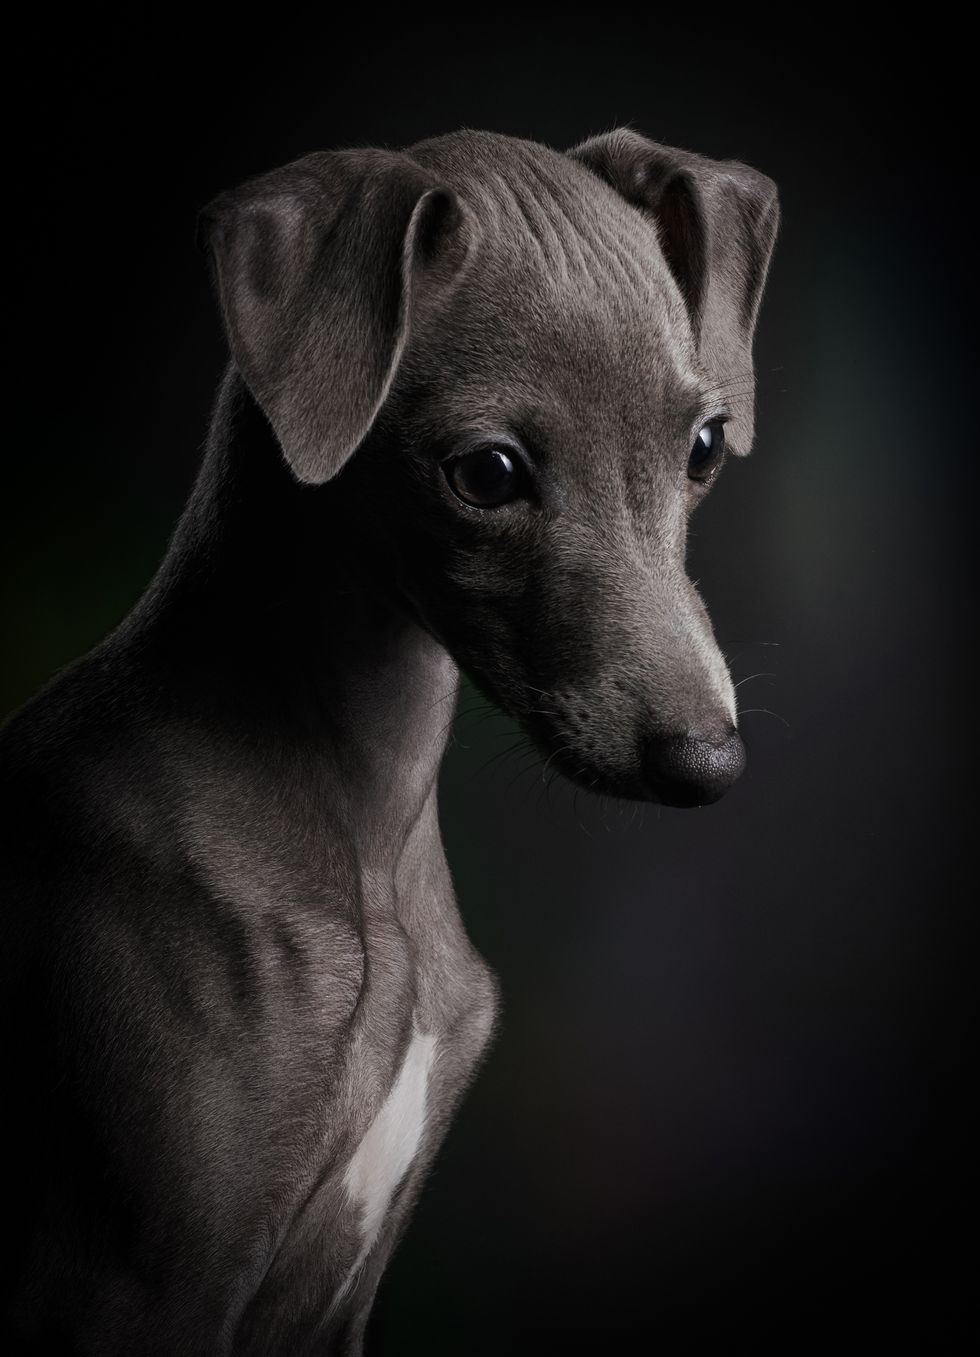 1st Puppies Klaus Dyba © - Dog Photographer of the Year 2018